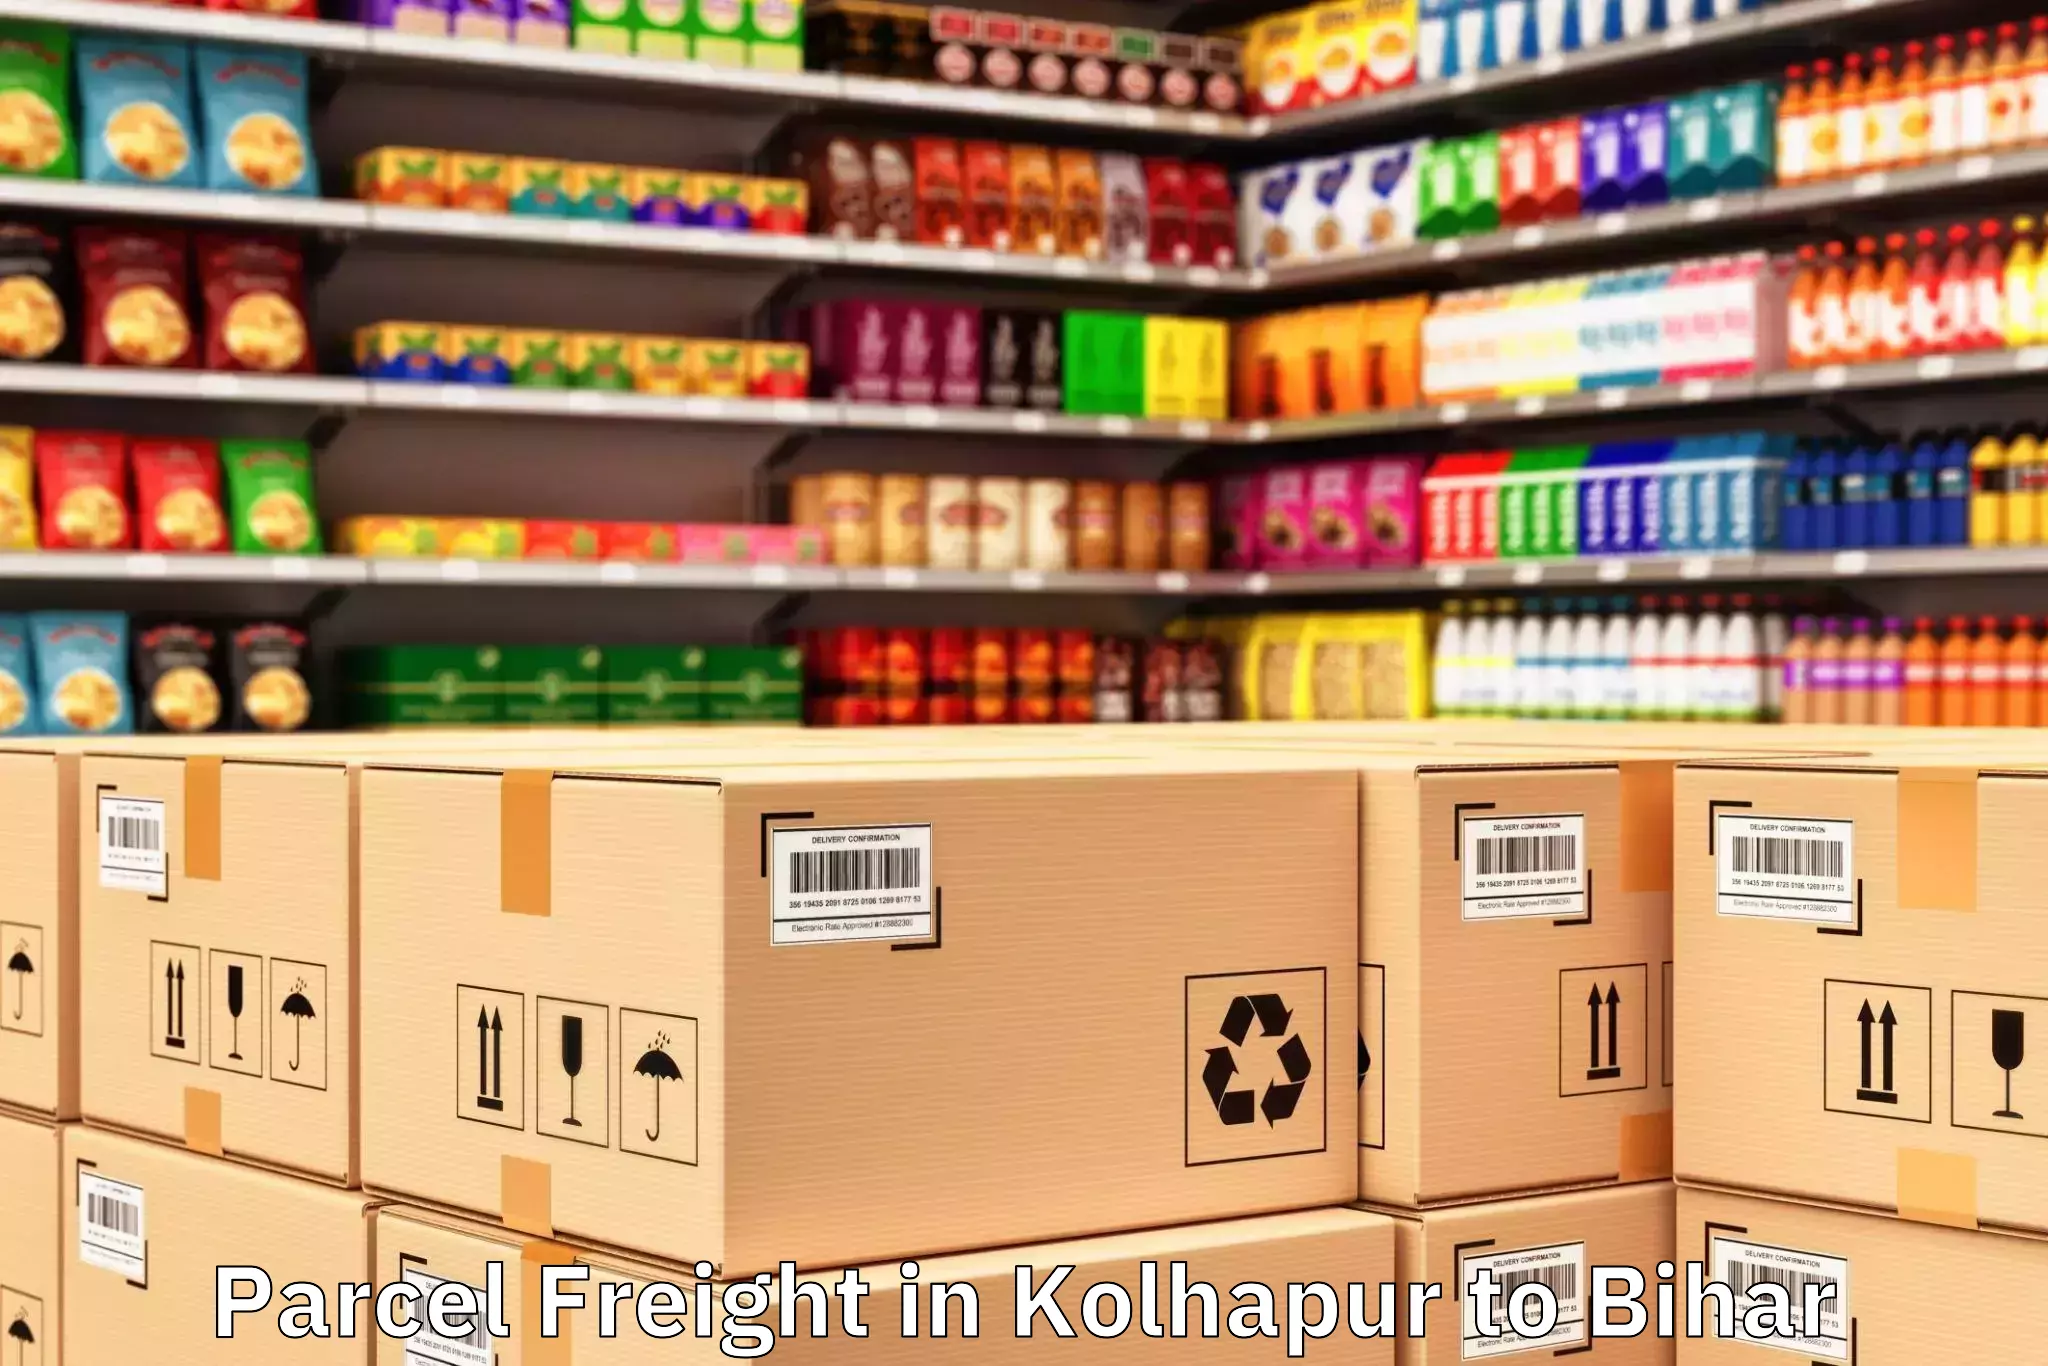 Reliable Kolhapur to Deo Parcel Freight